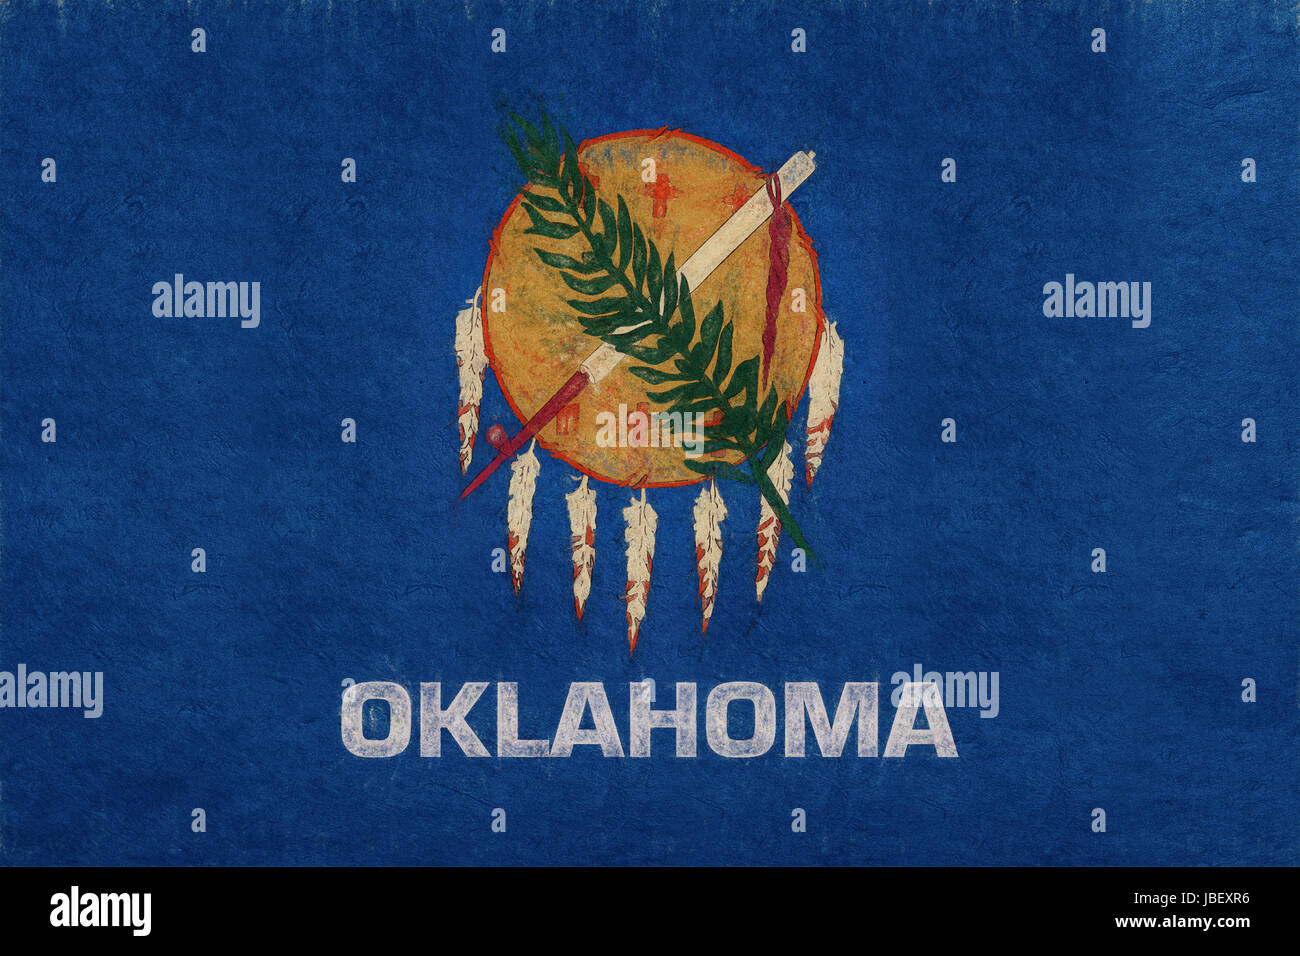 Illustration of the flag of Oklahomastate in America with a grunge look. Stock Photo